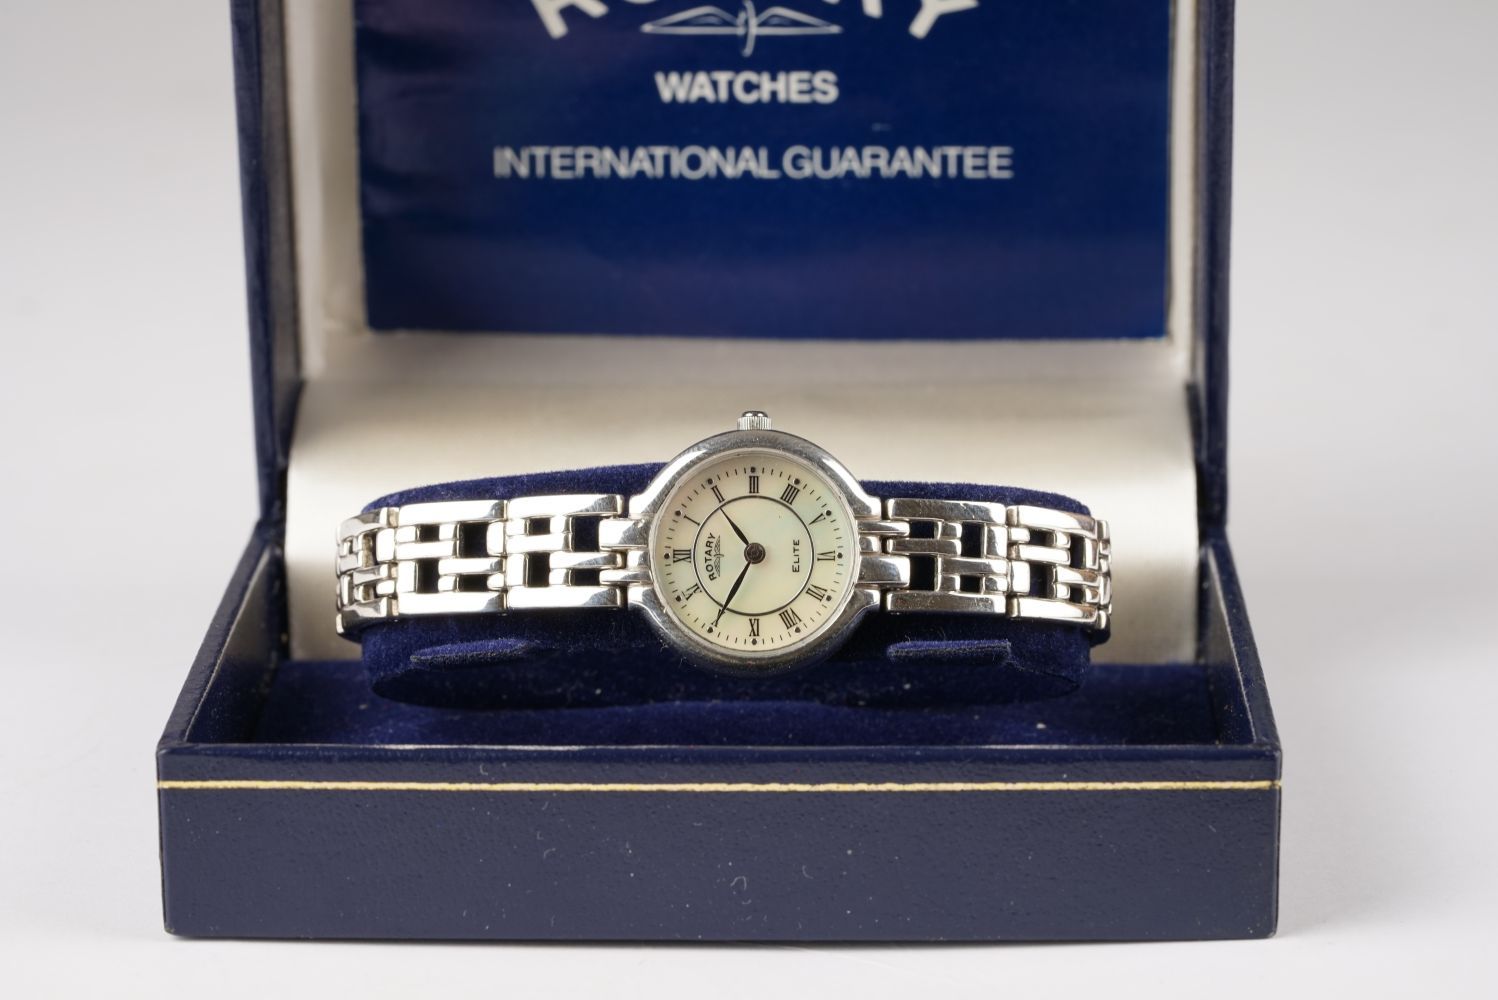 LADIES ROTARY ELITE STERLING SILVER WRISTWATCH W/ BOX & GUARANTEE, circular mother of pearl dial